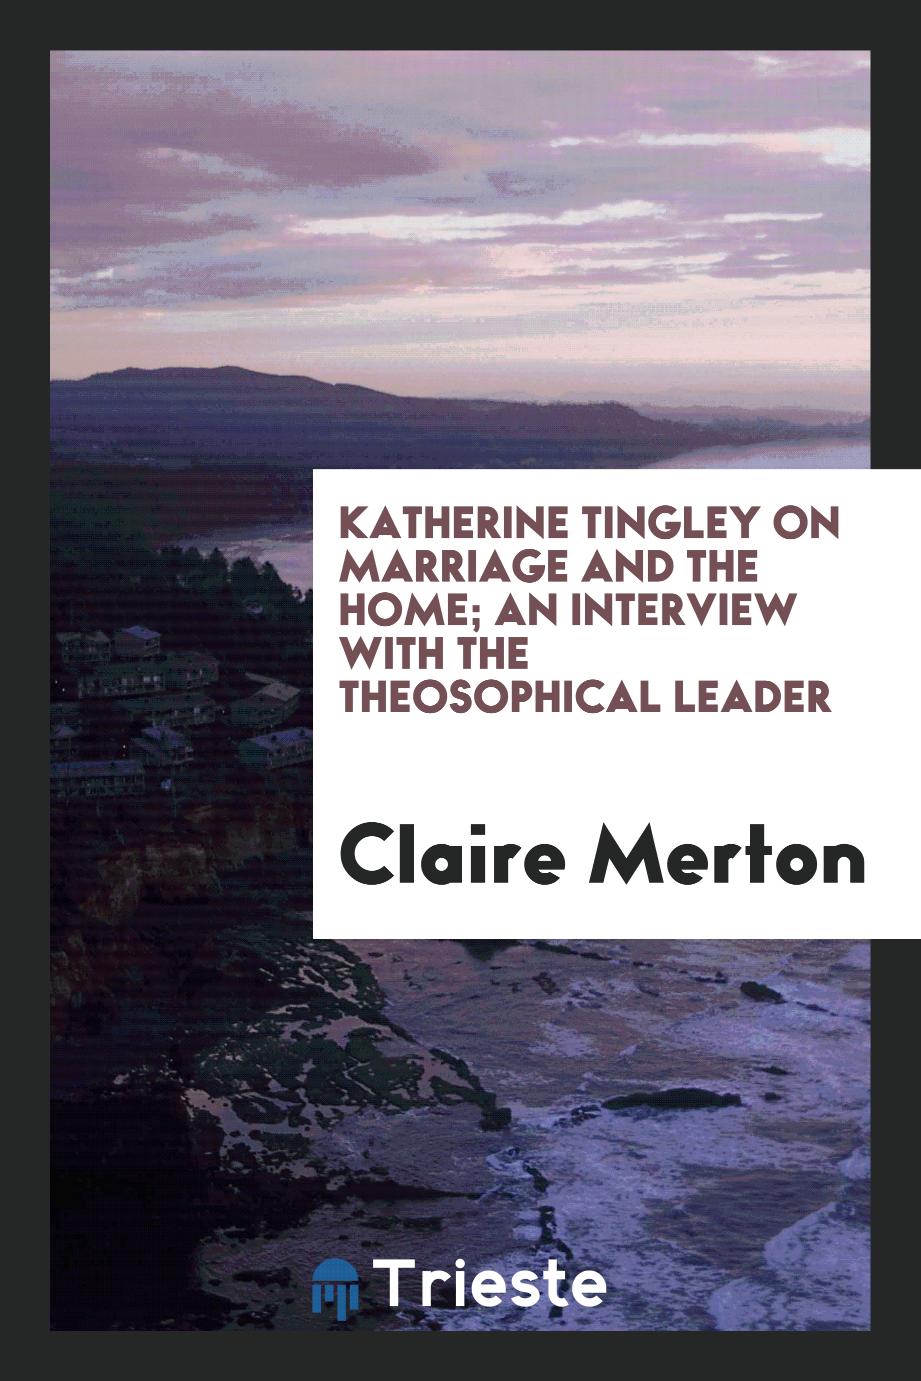 Katherine Tingley on marriage and the home; an interview with the theosophical leader